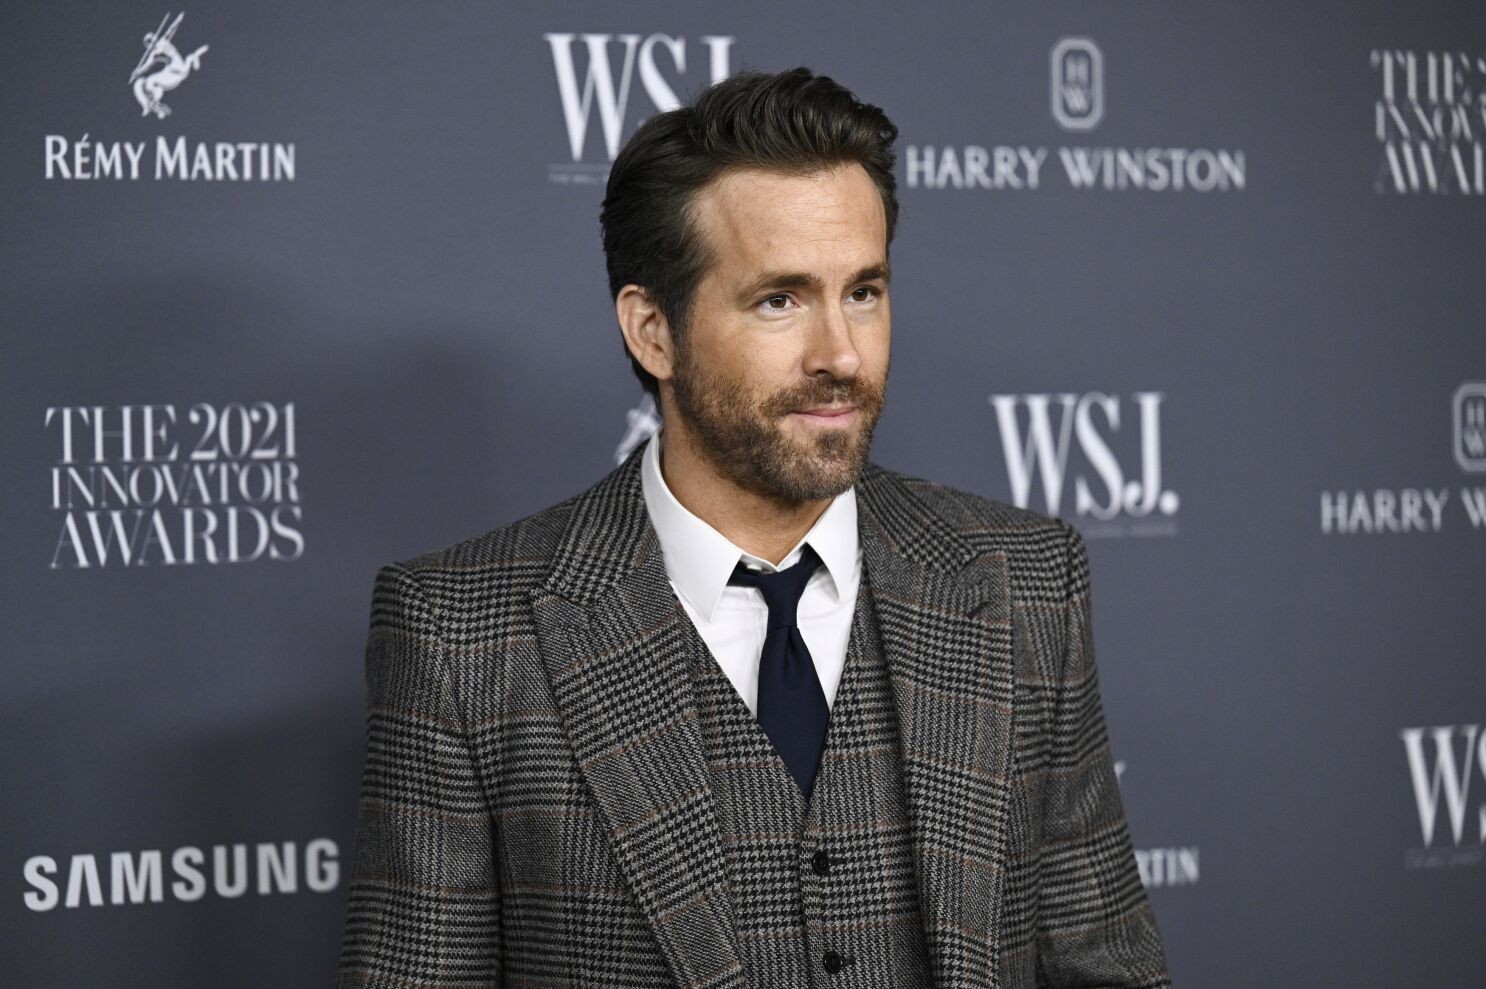 Ryan Reynolds had to color wife Blake Lively's hair.